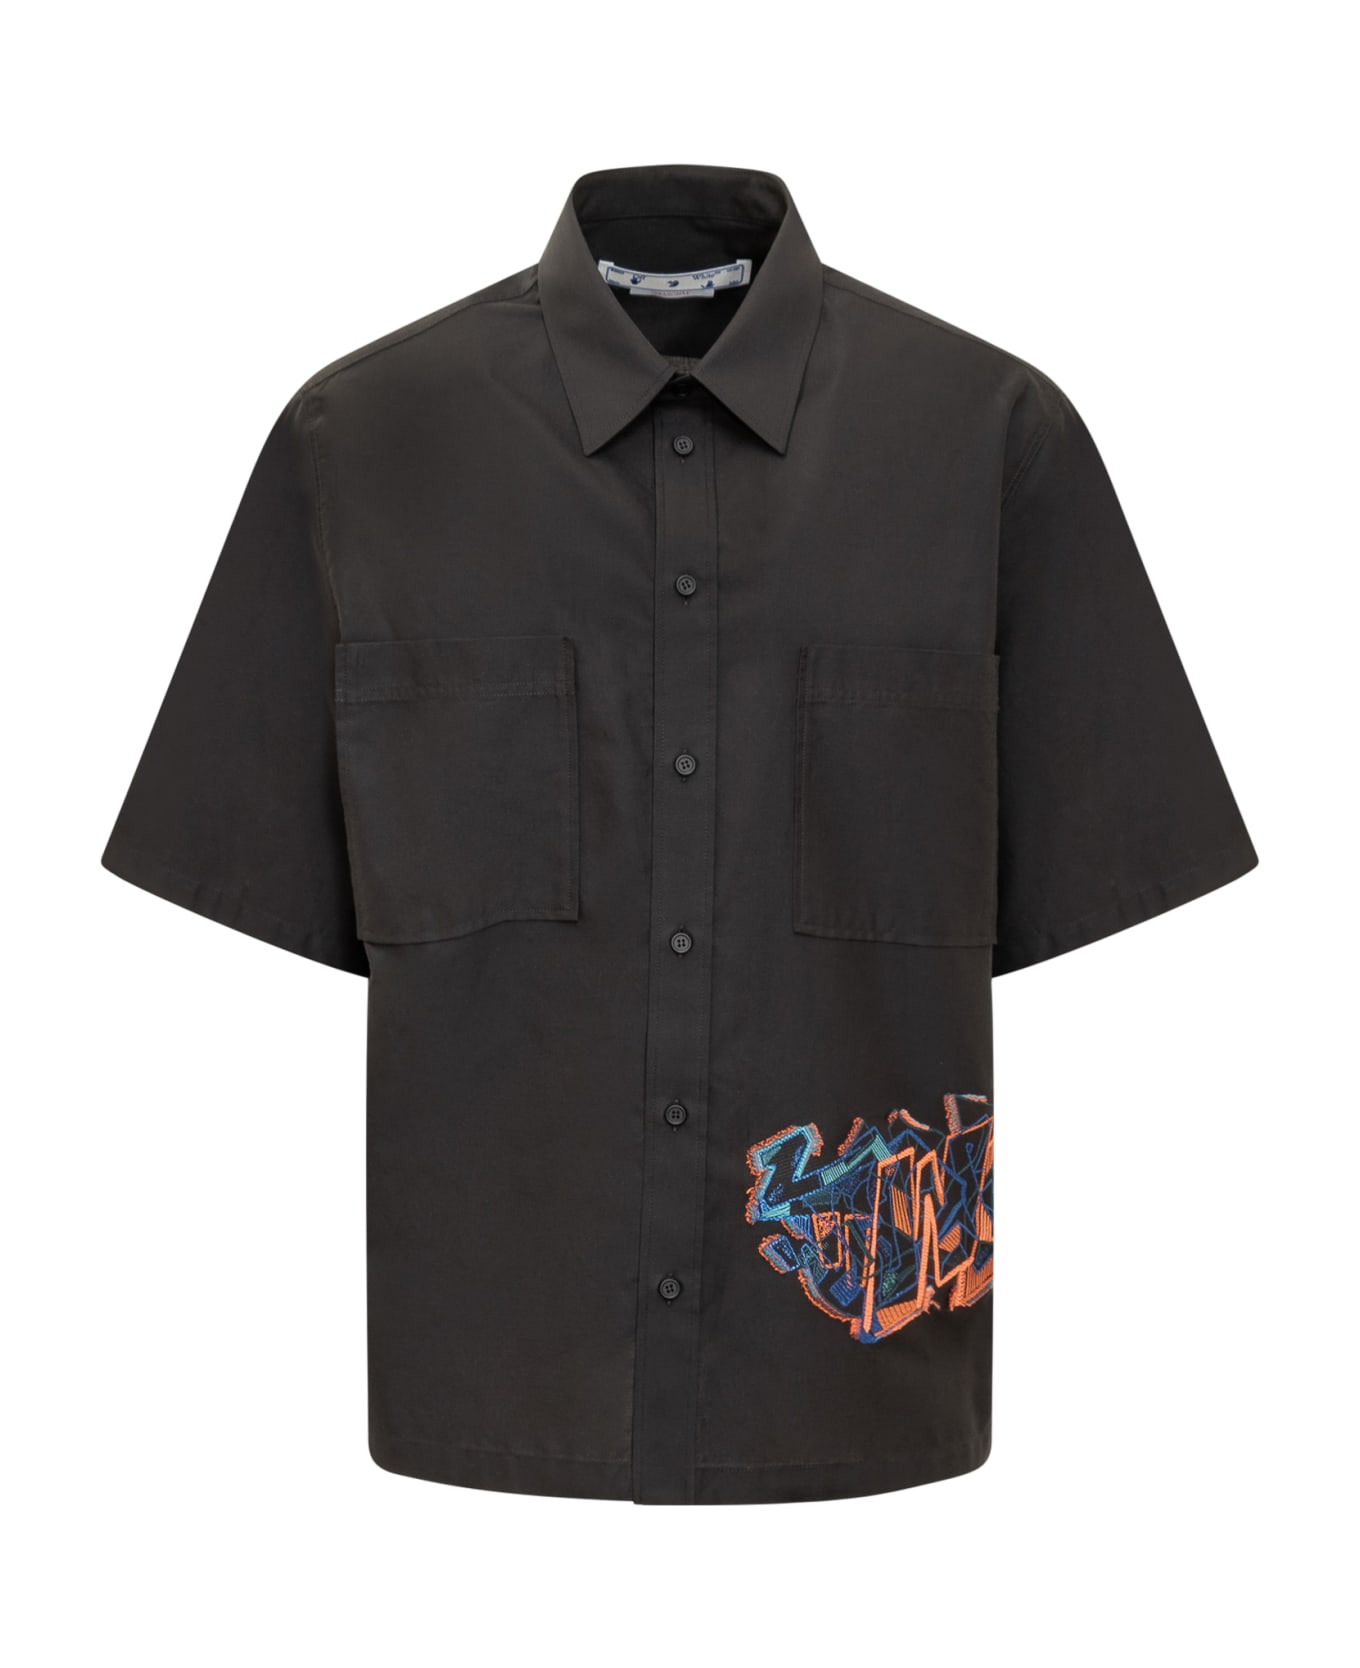 Off-White Short Sleeved Shirt With Multicolor Graffiti Embroidery - black シャツ